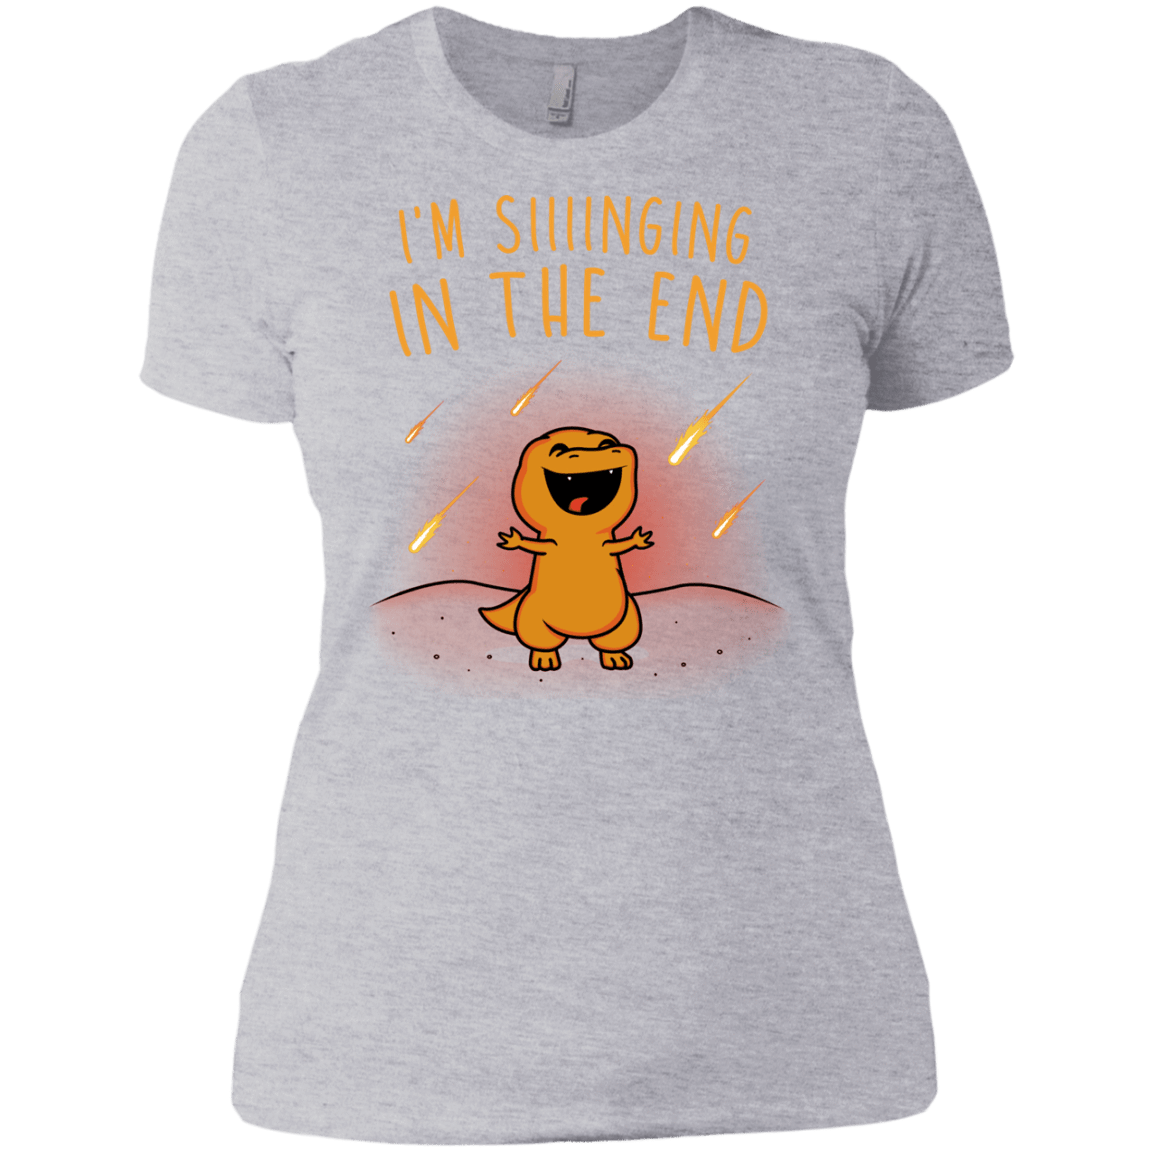 T-Shirts Heather Grey / X-Small Singing in the End Women's Premium T-Shirt